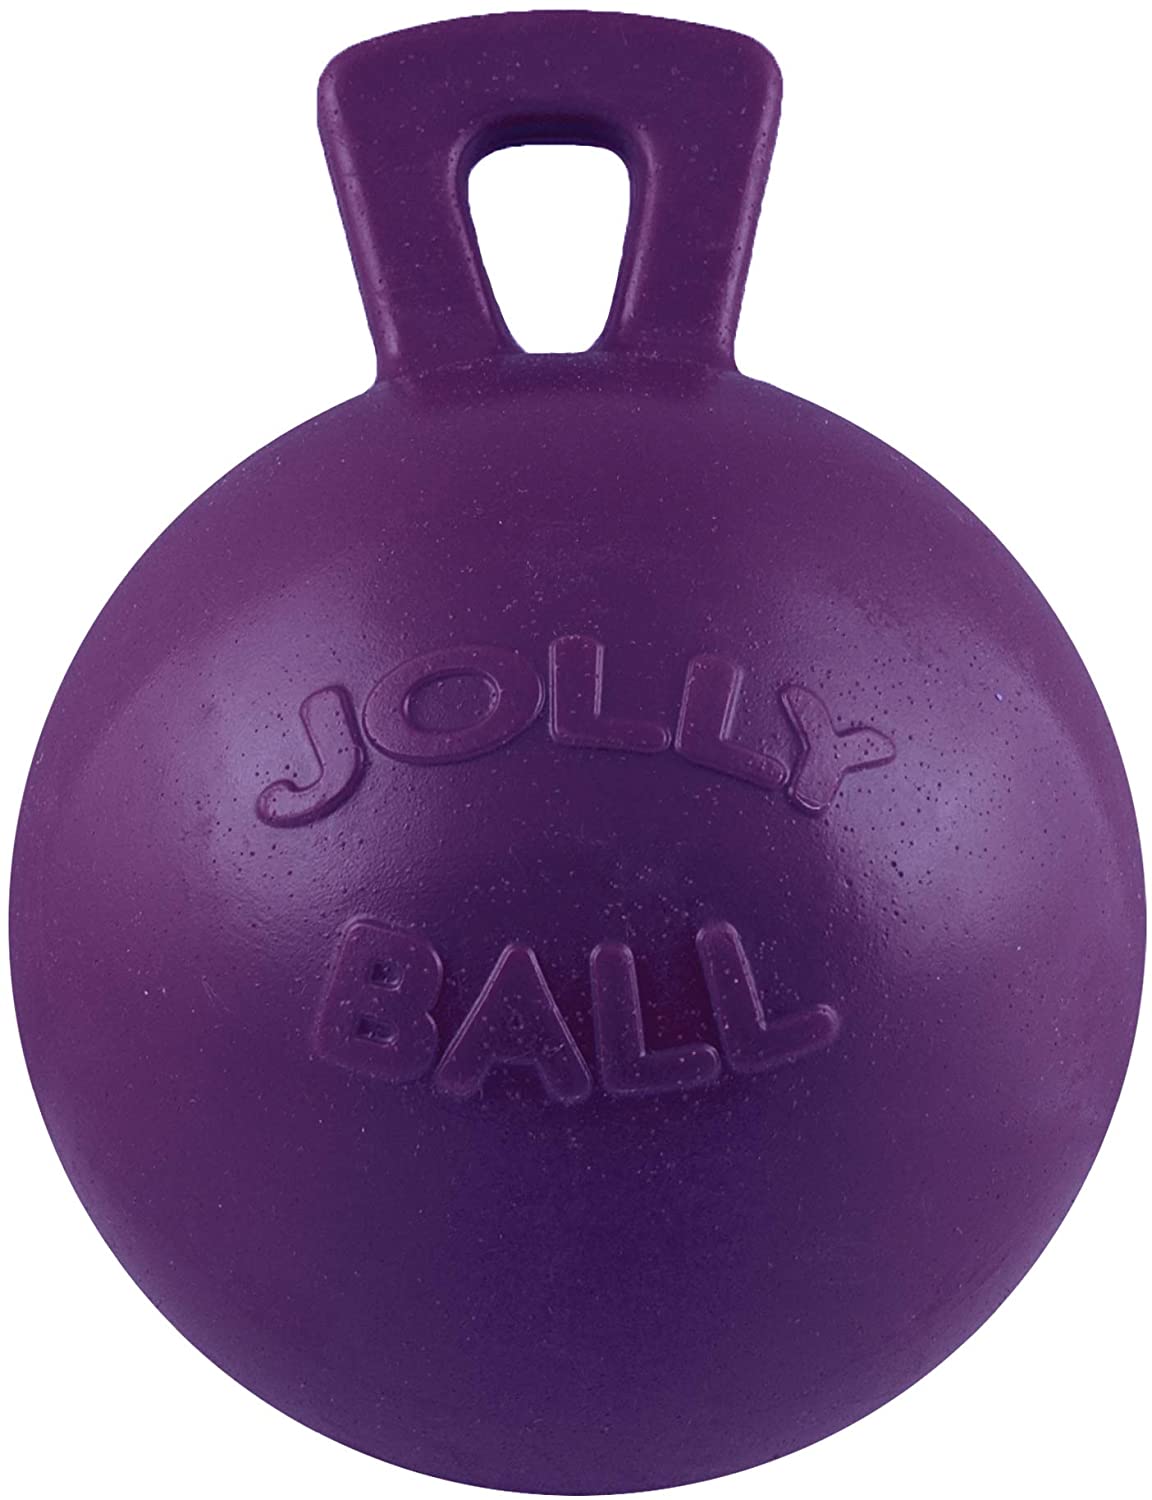 Jolly Ball With Handle